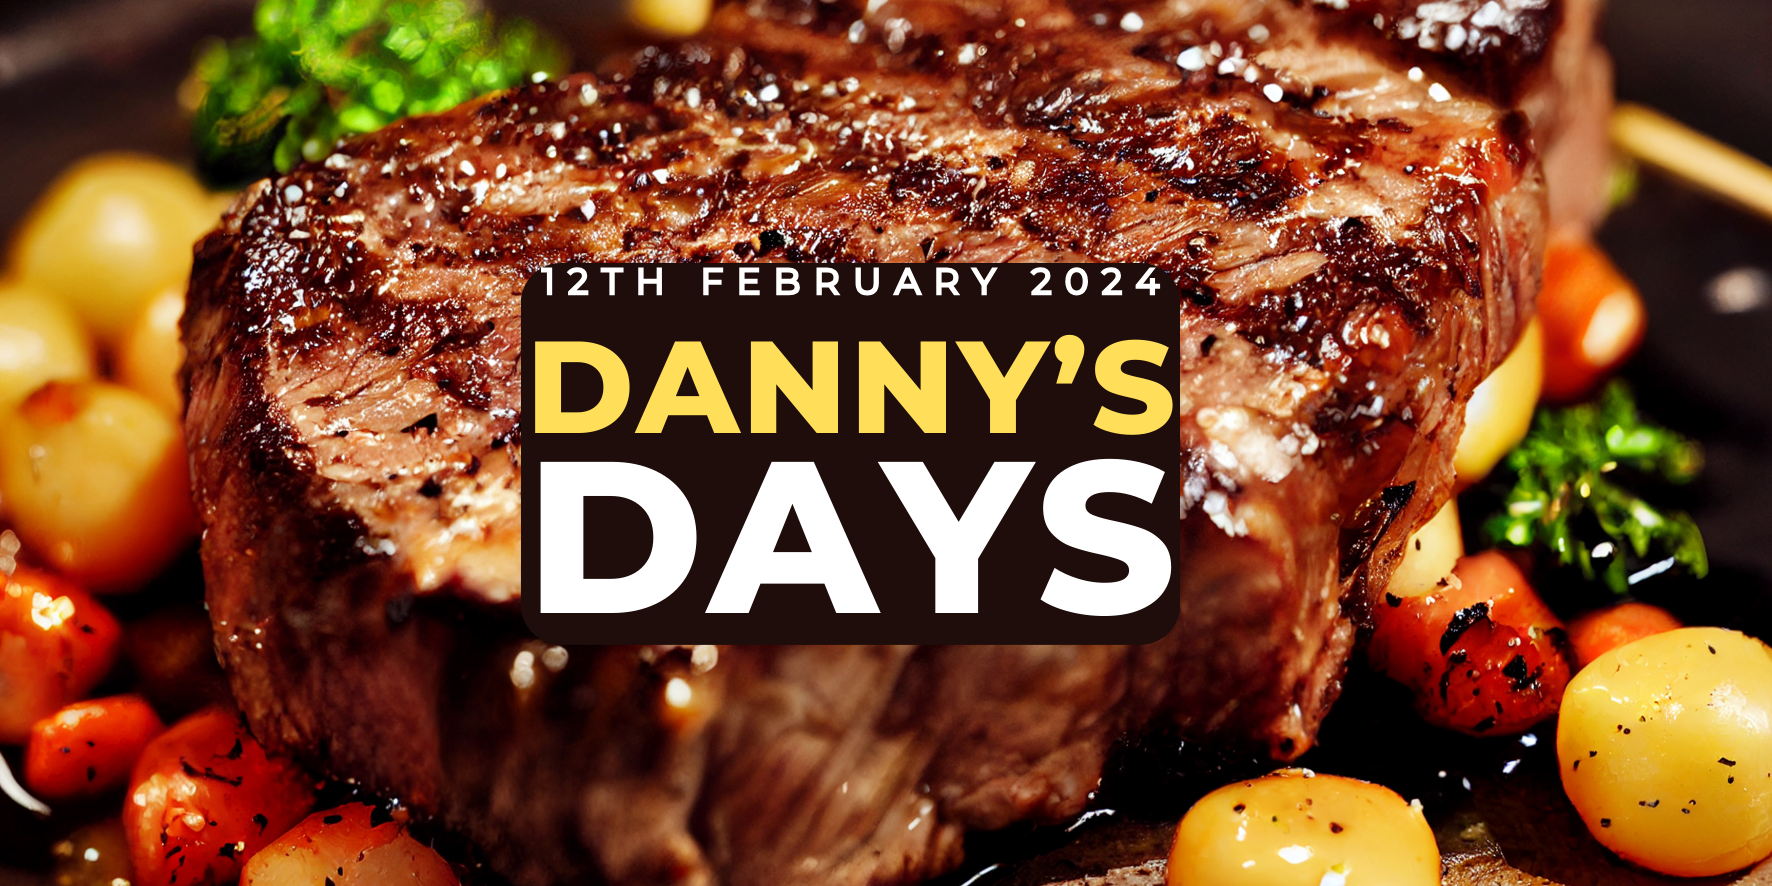 Danny's Days - 12th February 2024